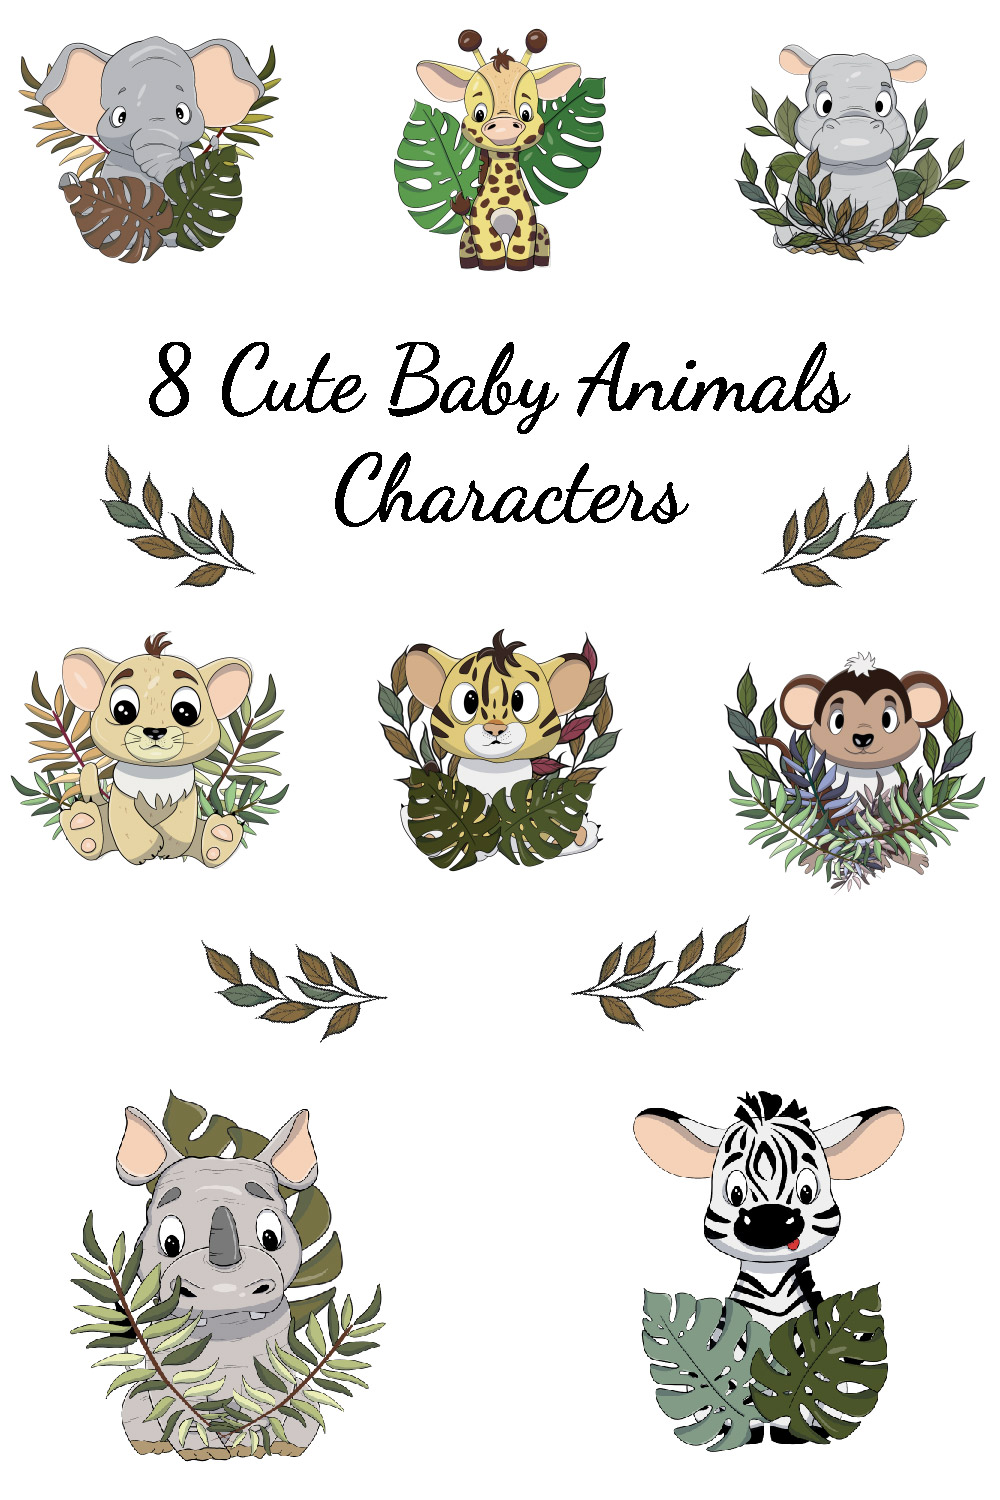 Cute Baby Animals Character pinterest image.